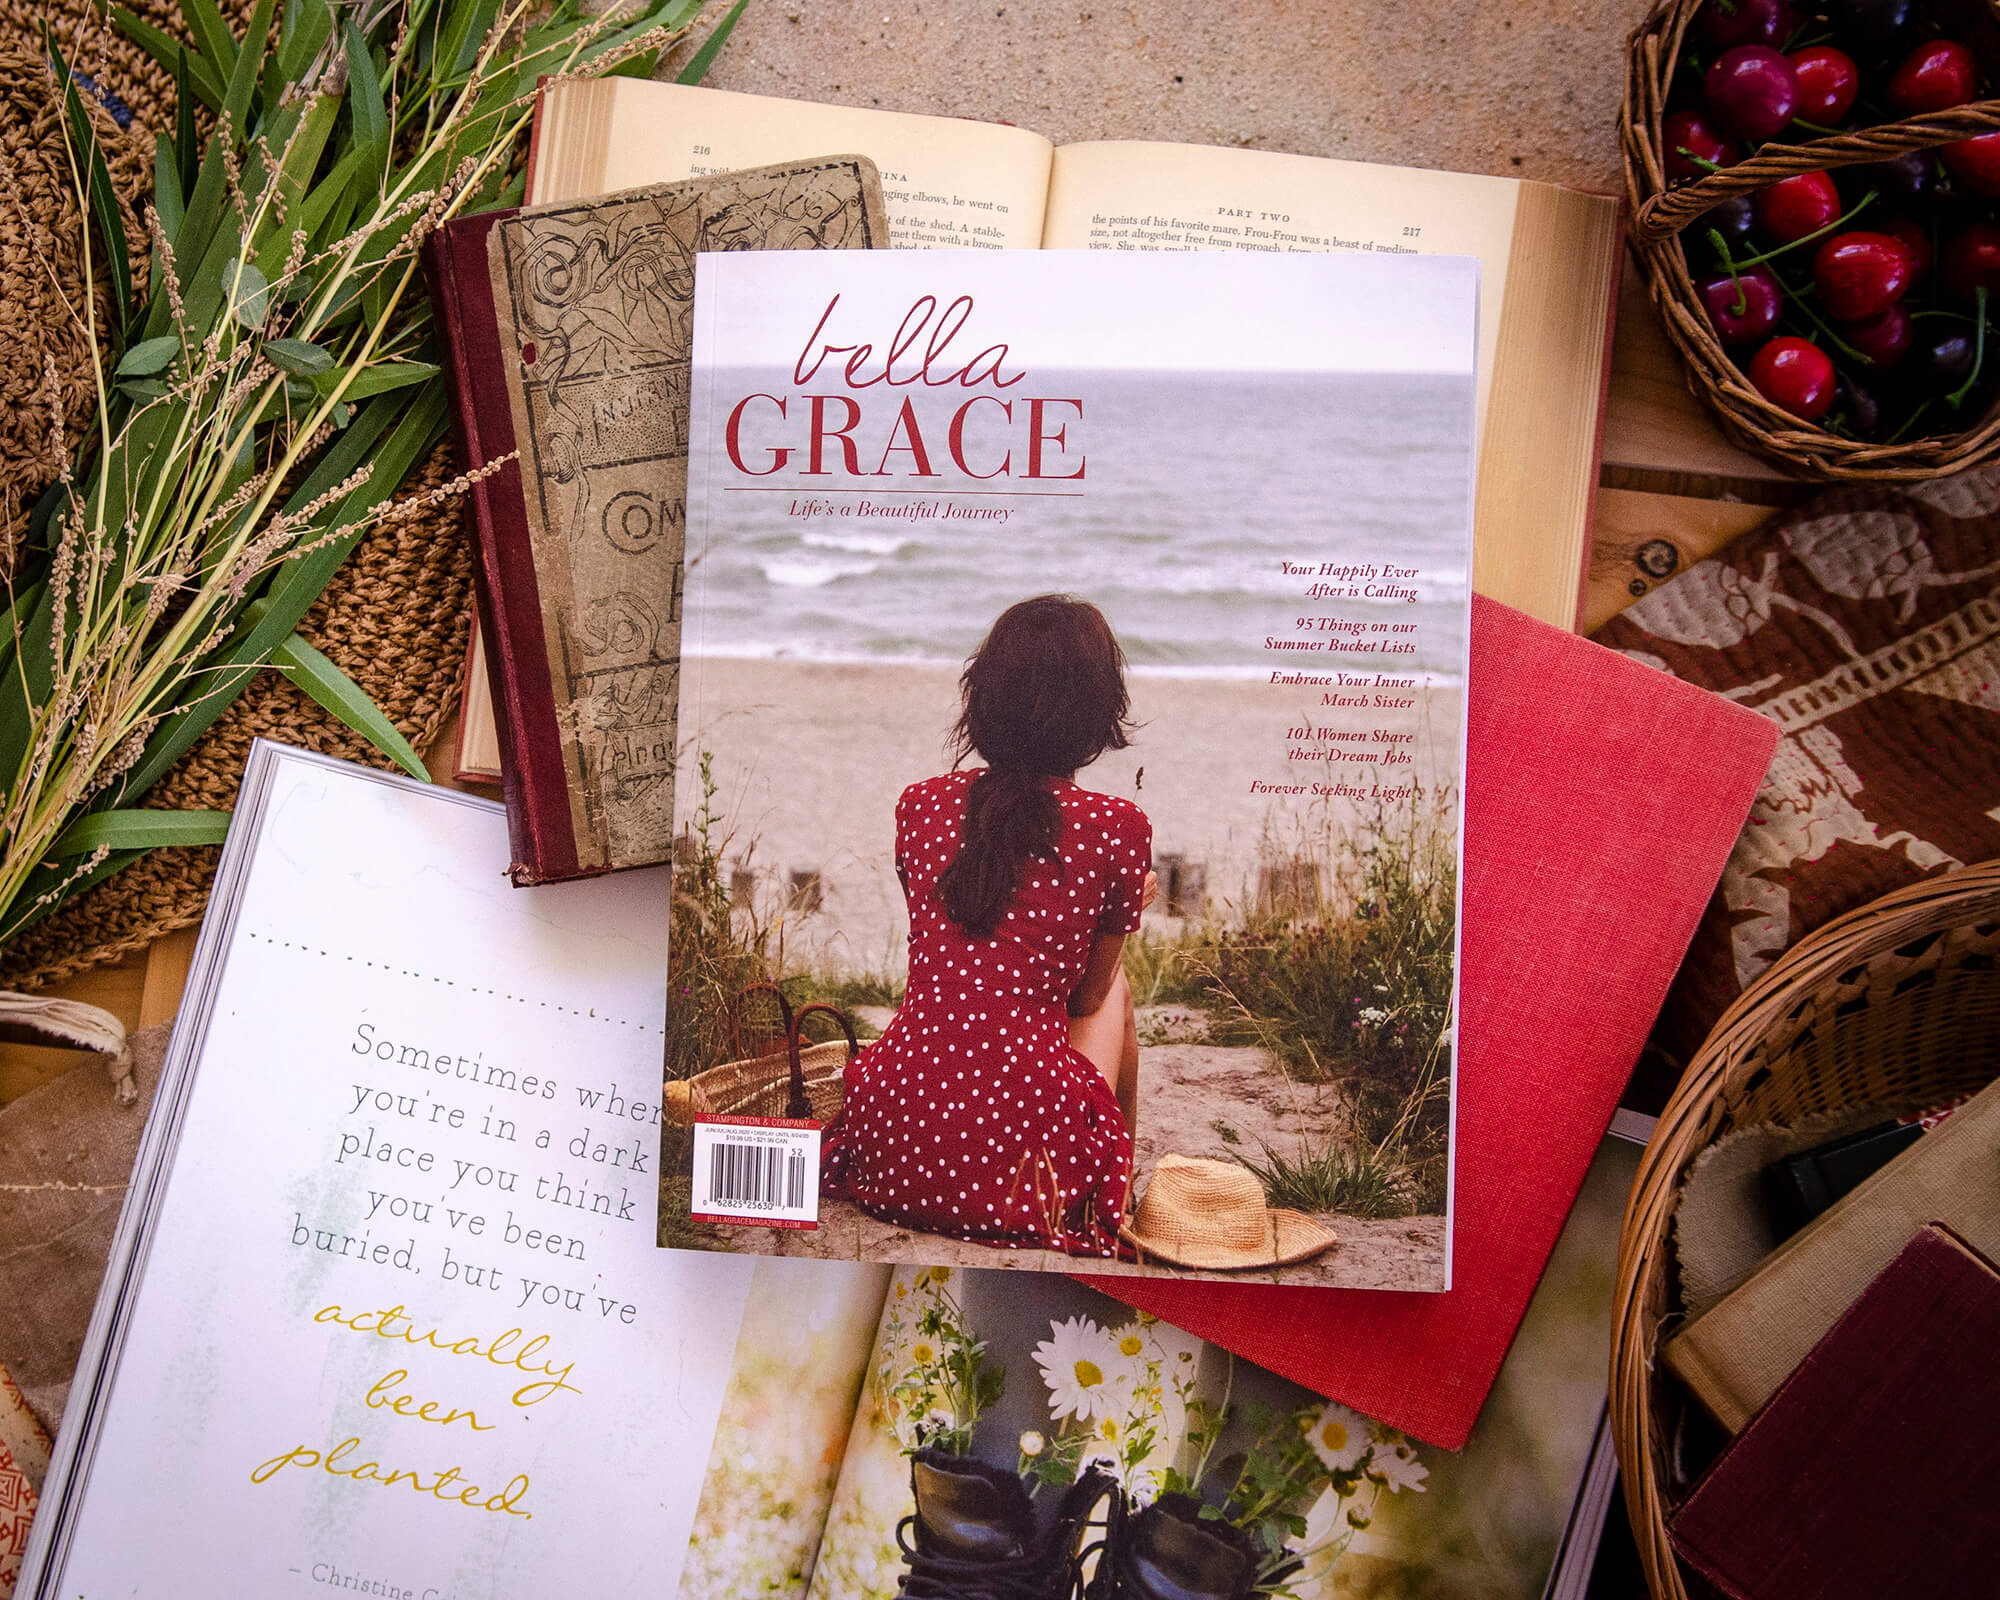 A Moment with Bella Grace Issue 24 + Win a Free Issue!